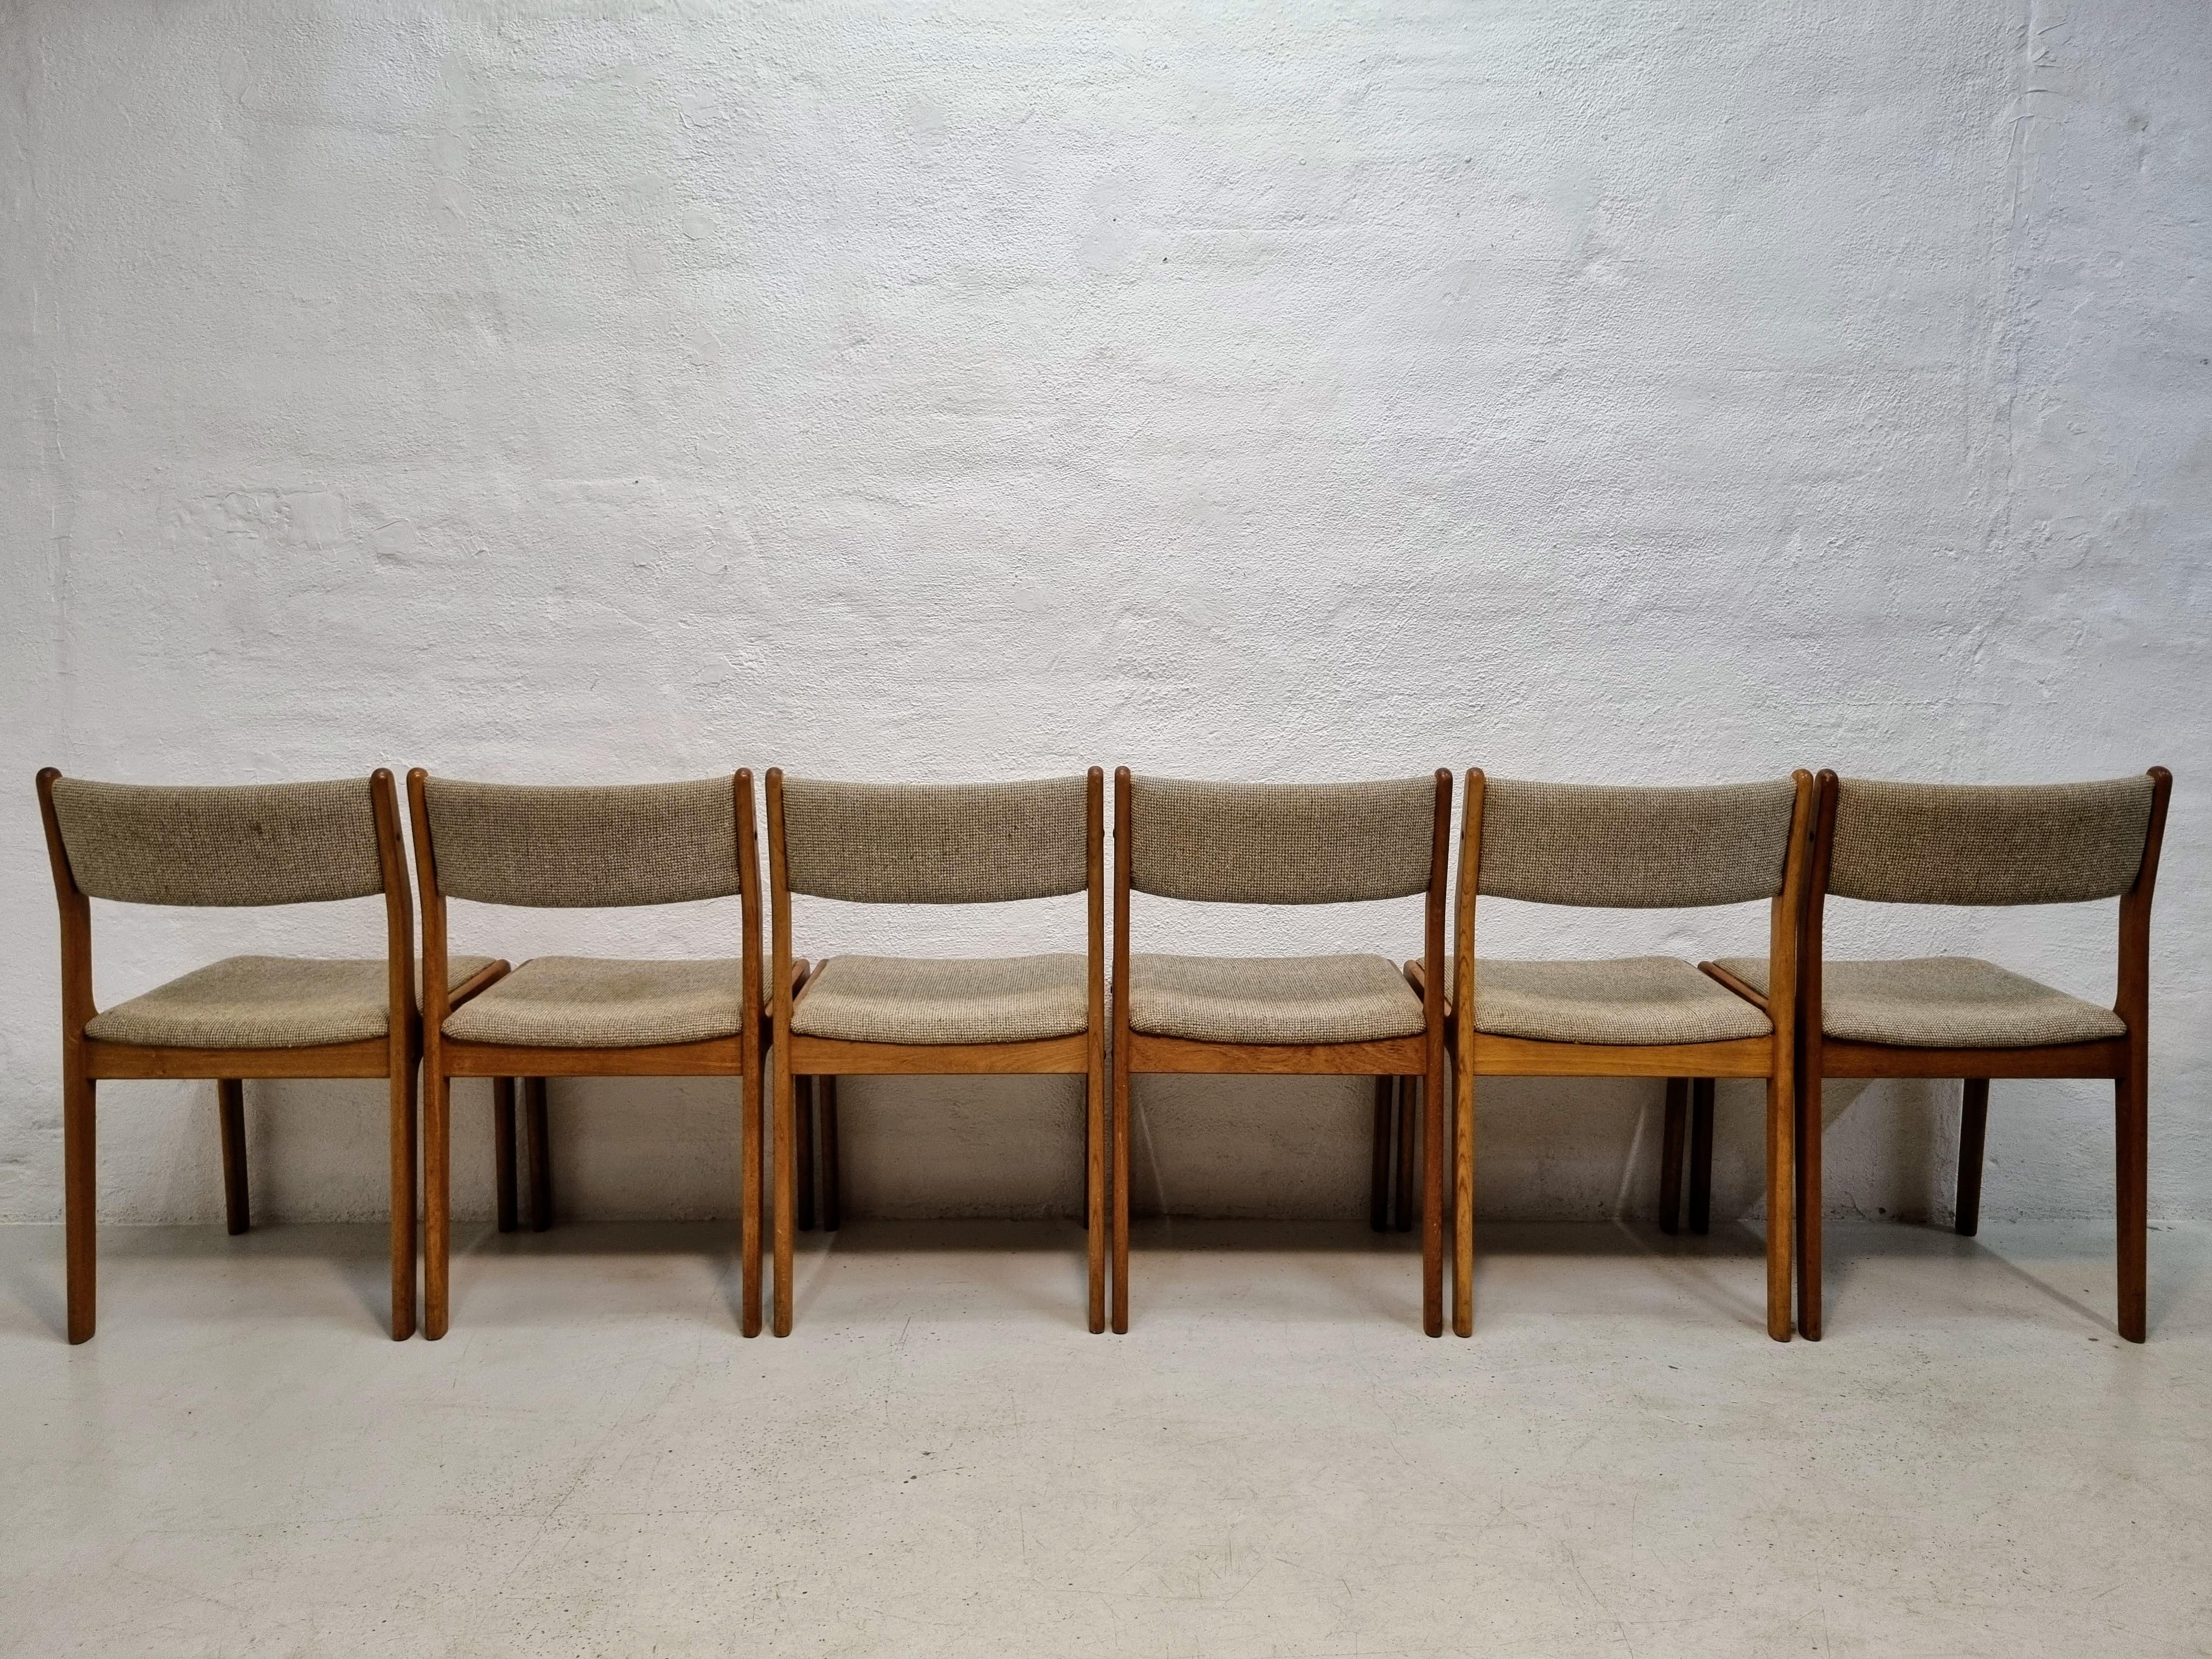 A set of 6 dining chairs from Findahl's furniture factory. 
The chairs are made of solid teak wood covered with light upholstery fabric. They appear nice and stable in the frame, however with a few normal age-related traces of use and they need to